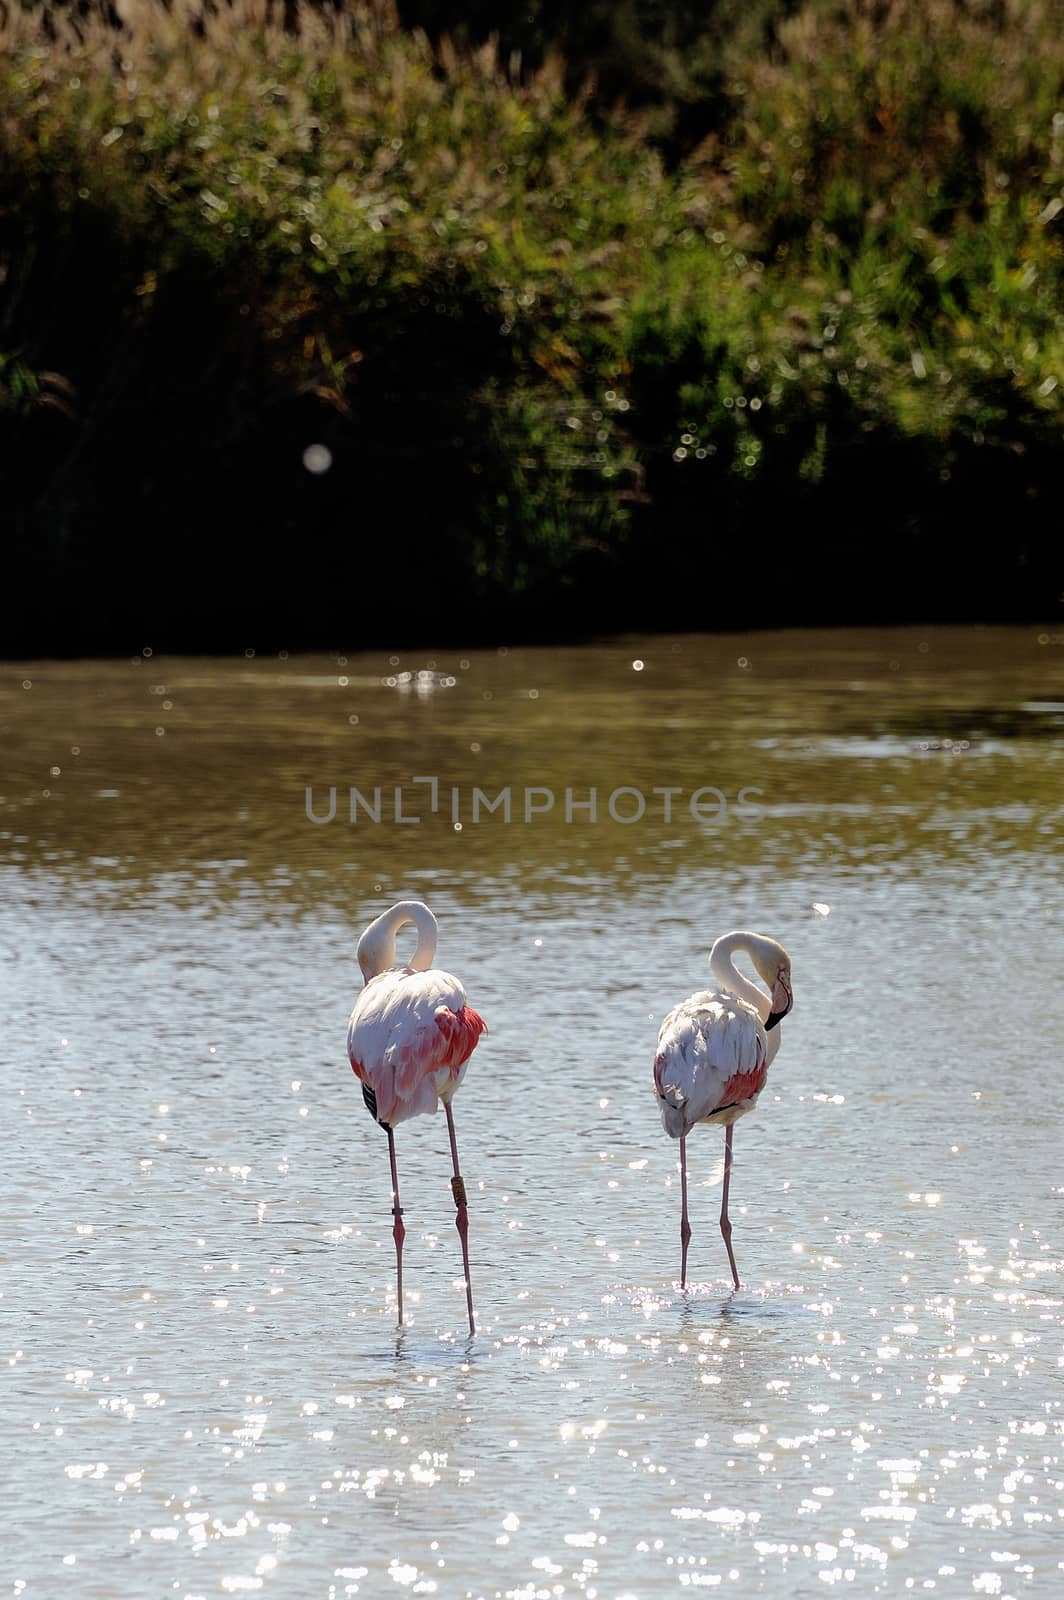 Flamingos in Camargue by gillespaire